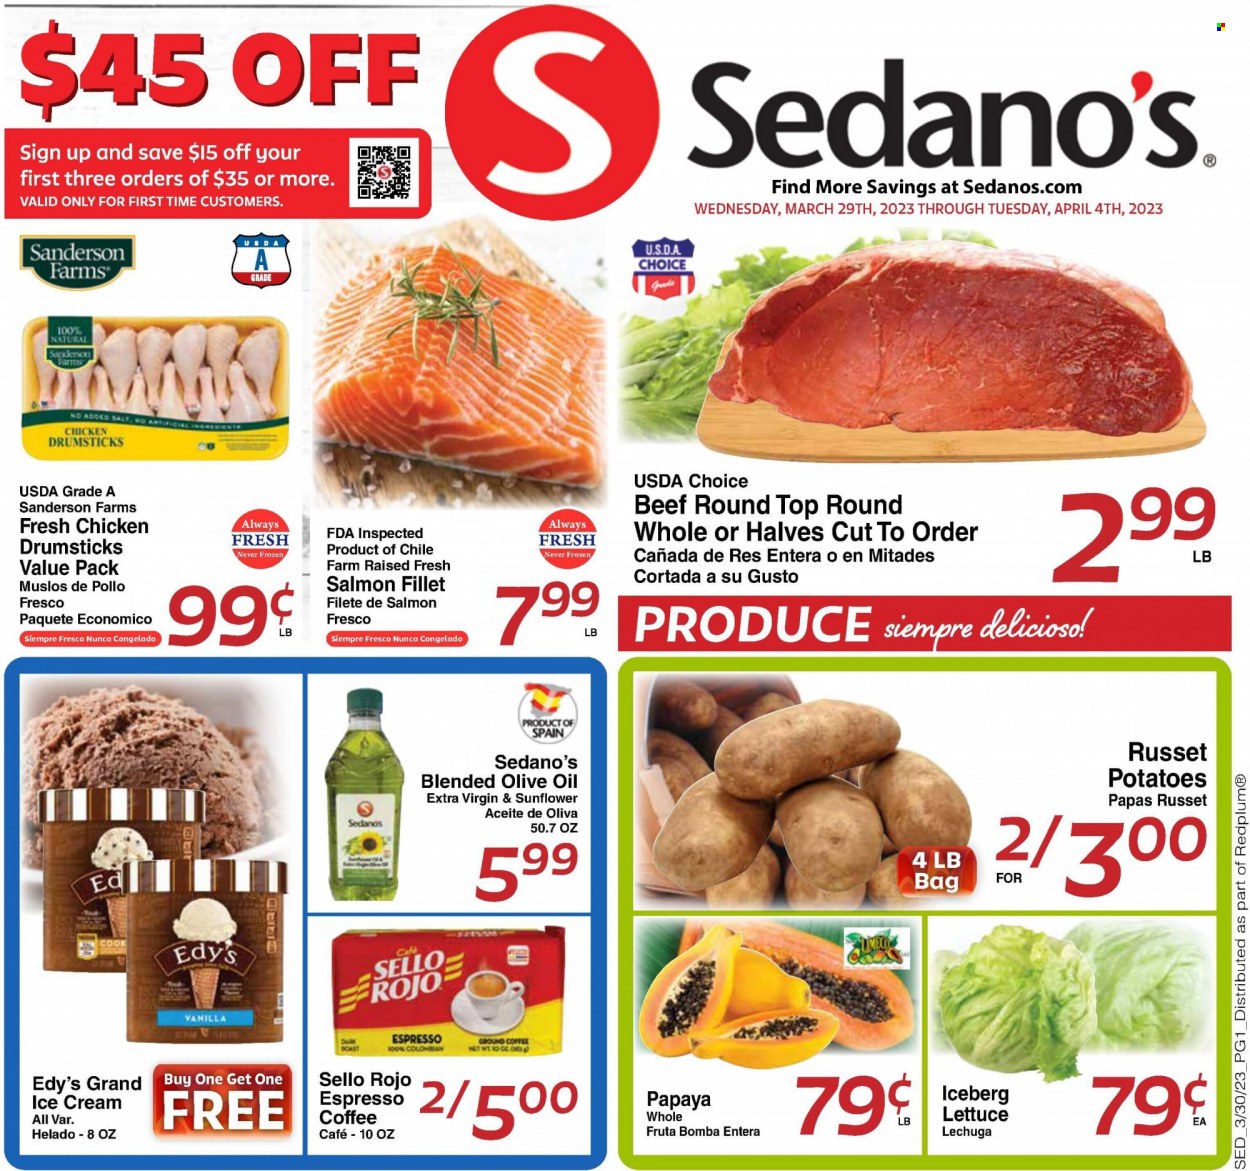 thumbnail - Sedano's Flyer - 03/22/2023 - 03/28/2023 - Sales products - russet potatoes, potatoes, lettuce, papaya, salmon, salmon fillet, ice cream, extra virgin olive oil, olive oil, oil, coffee, ground coffee, chicken drumsticks, chicken. Page 1.